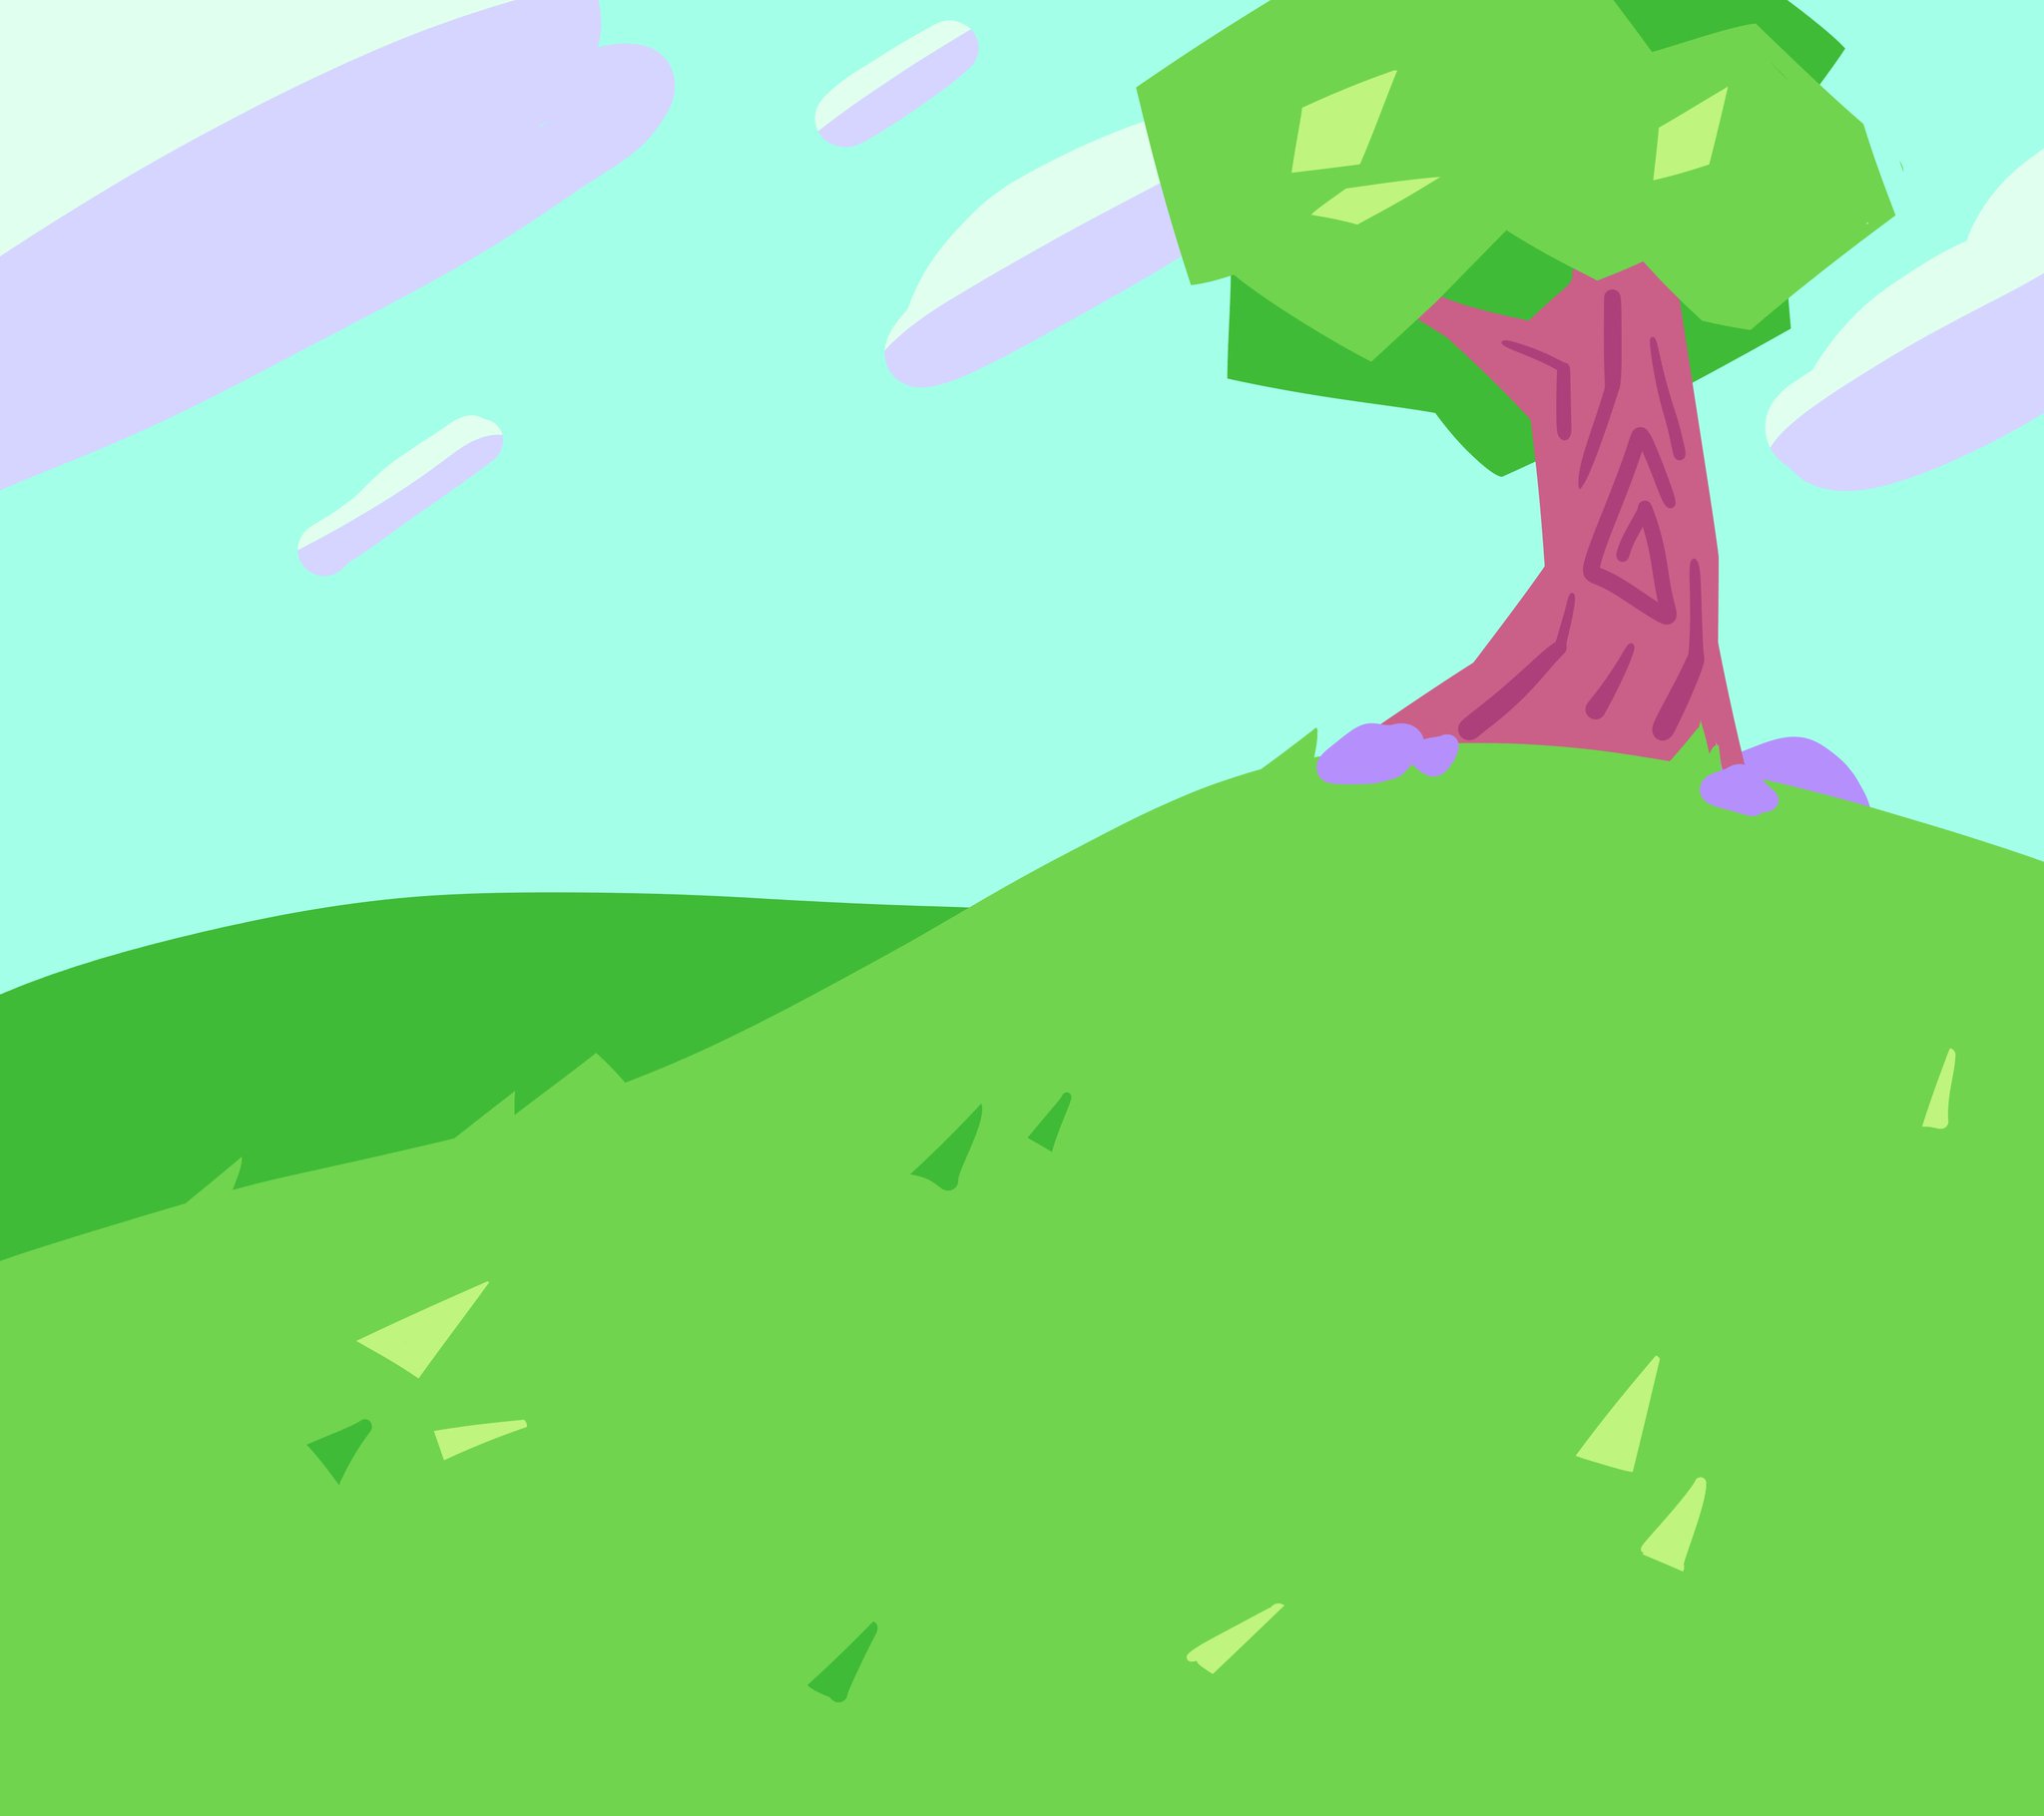 🌱🐸 on X: not bfdi related but im trying 2 get better at